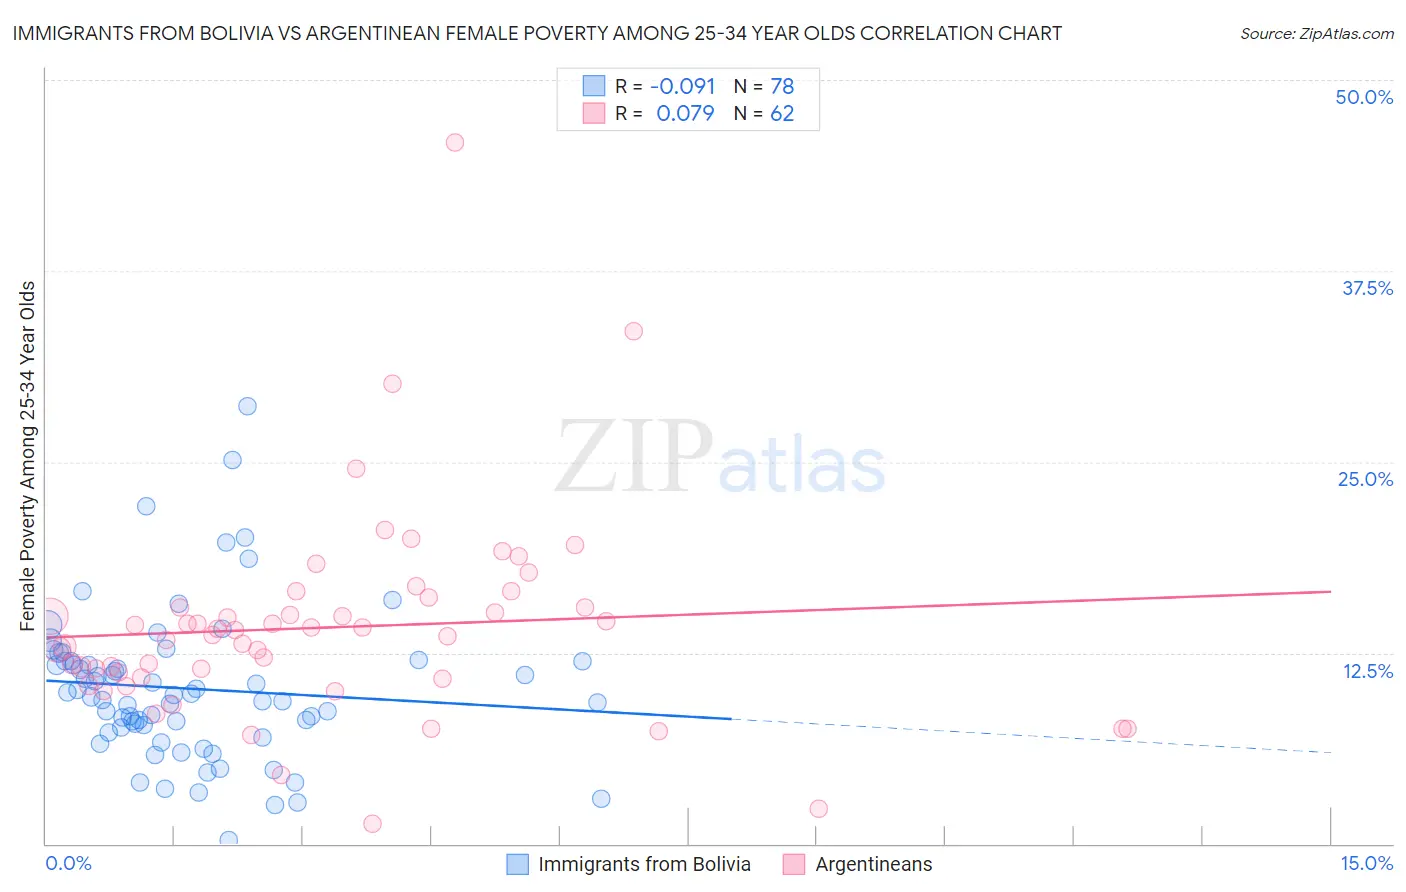 Immigrants from Bolivia vs Argentinean Female Poverty Among 25-34 Year Olds